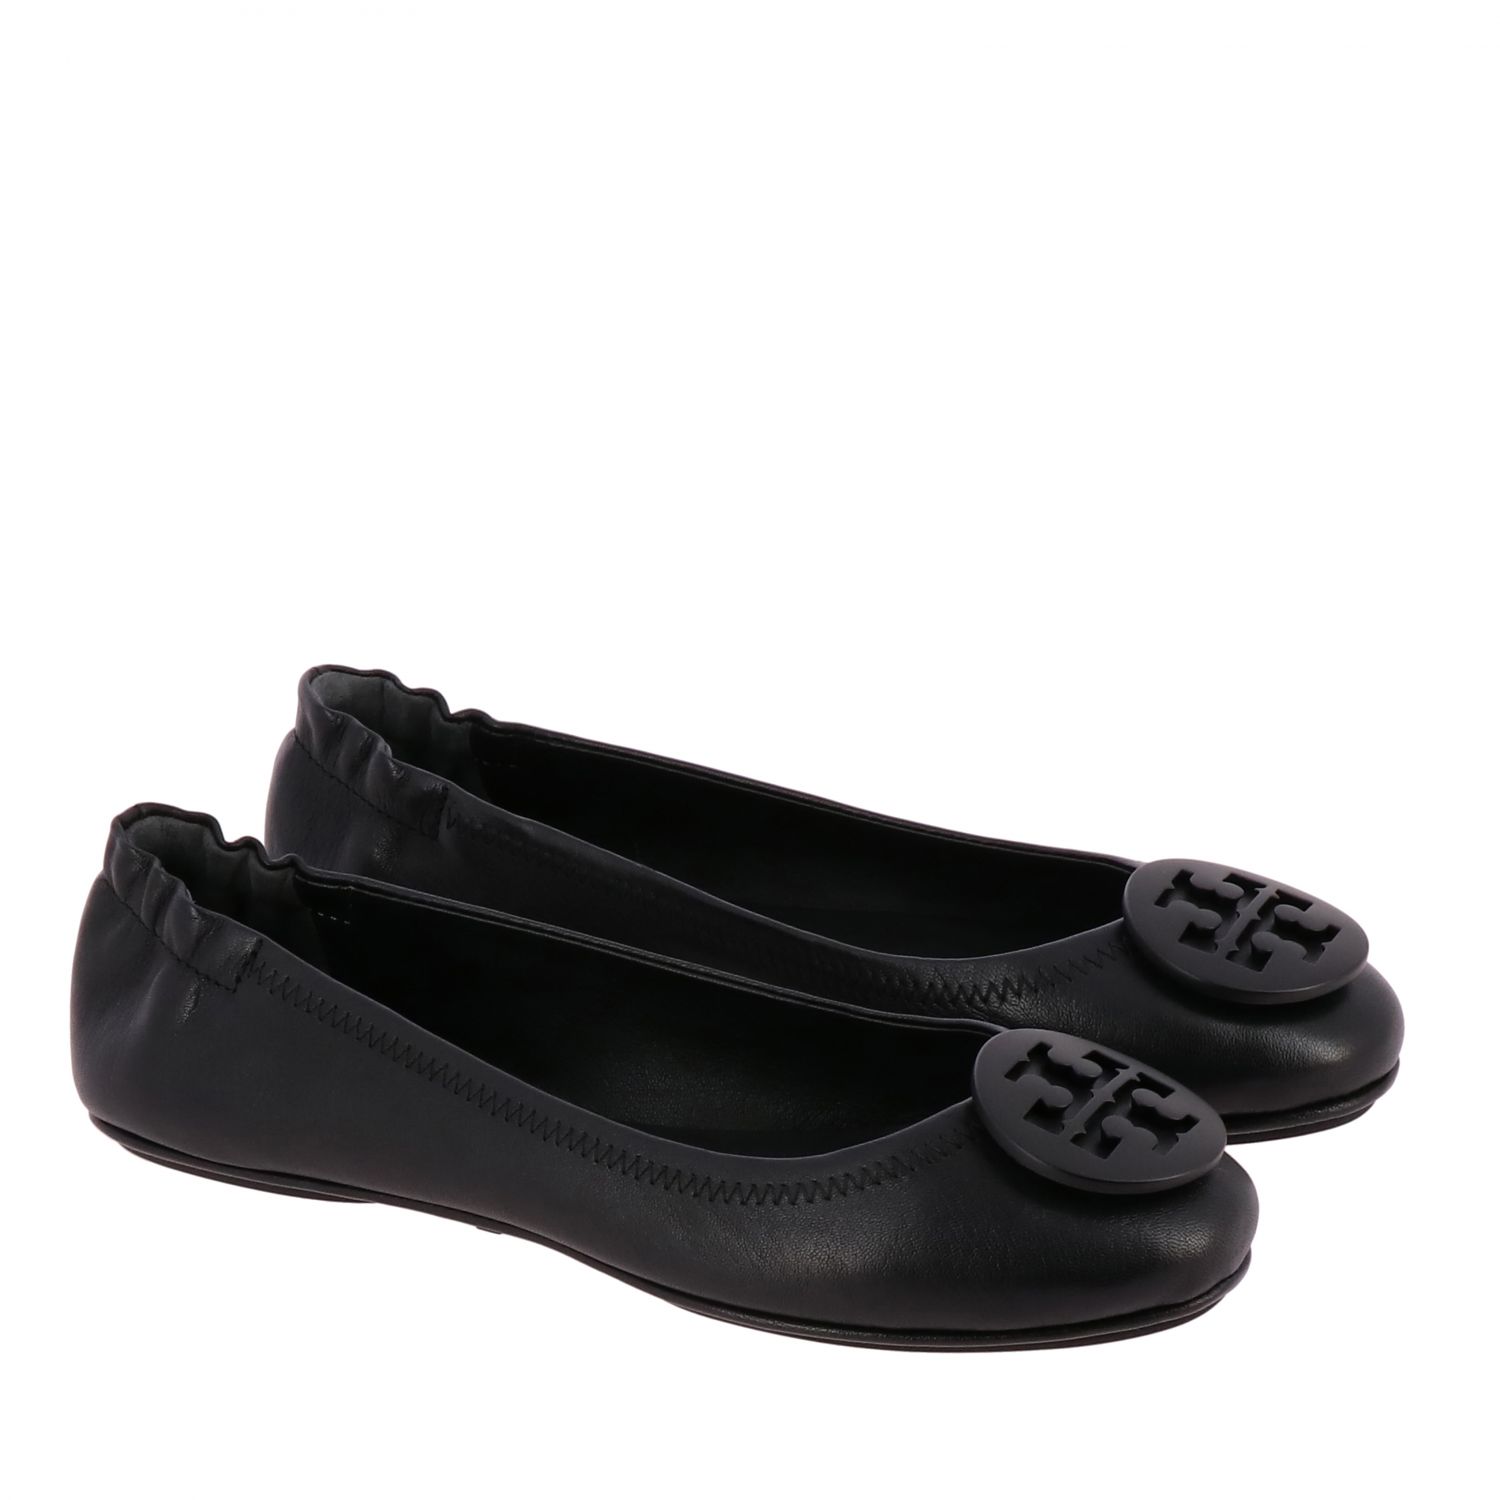 Tory Burch Outlet: Minnie ballet flat in leather with emblem - Black | Tory  Burch ballet flats 49350 online on 